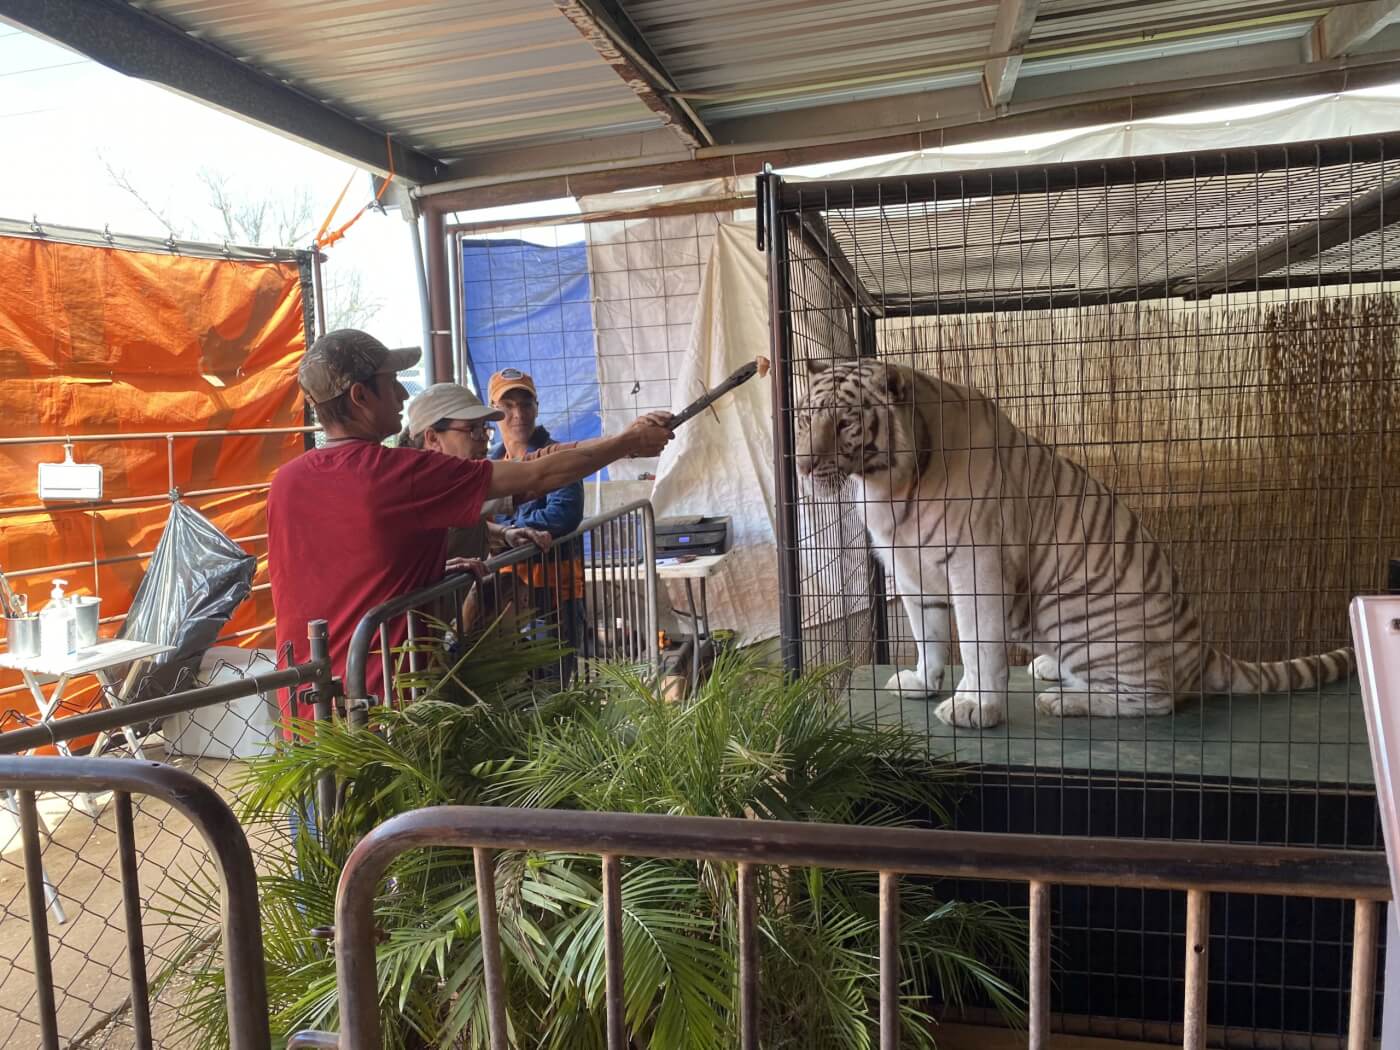 All Things Wild exhibit with tigers, animals used for entertainment 